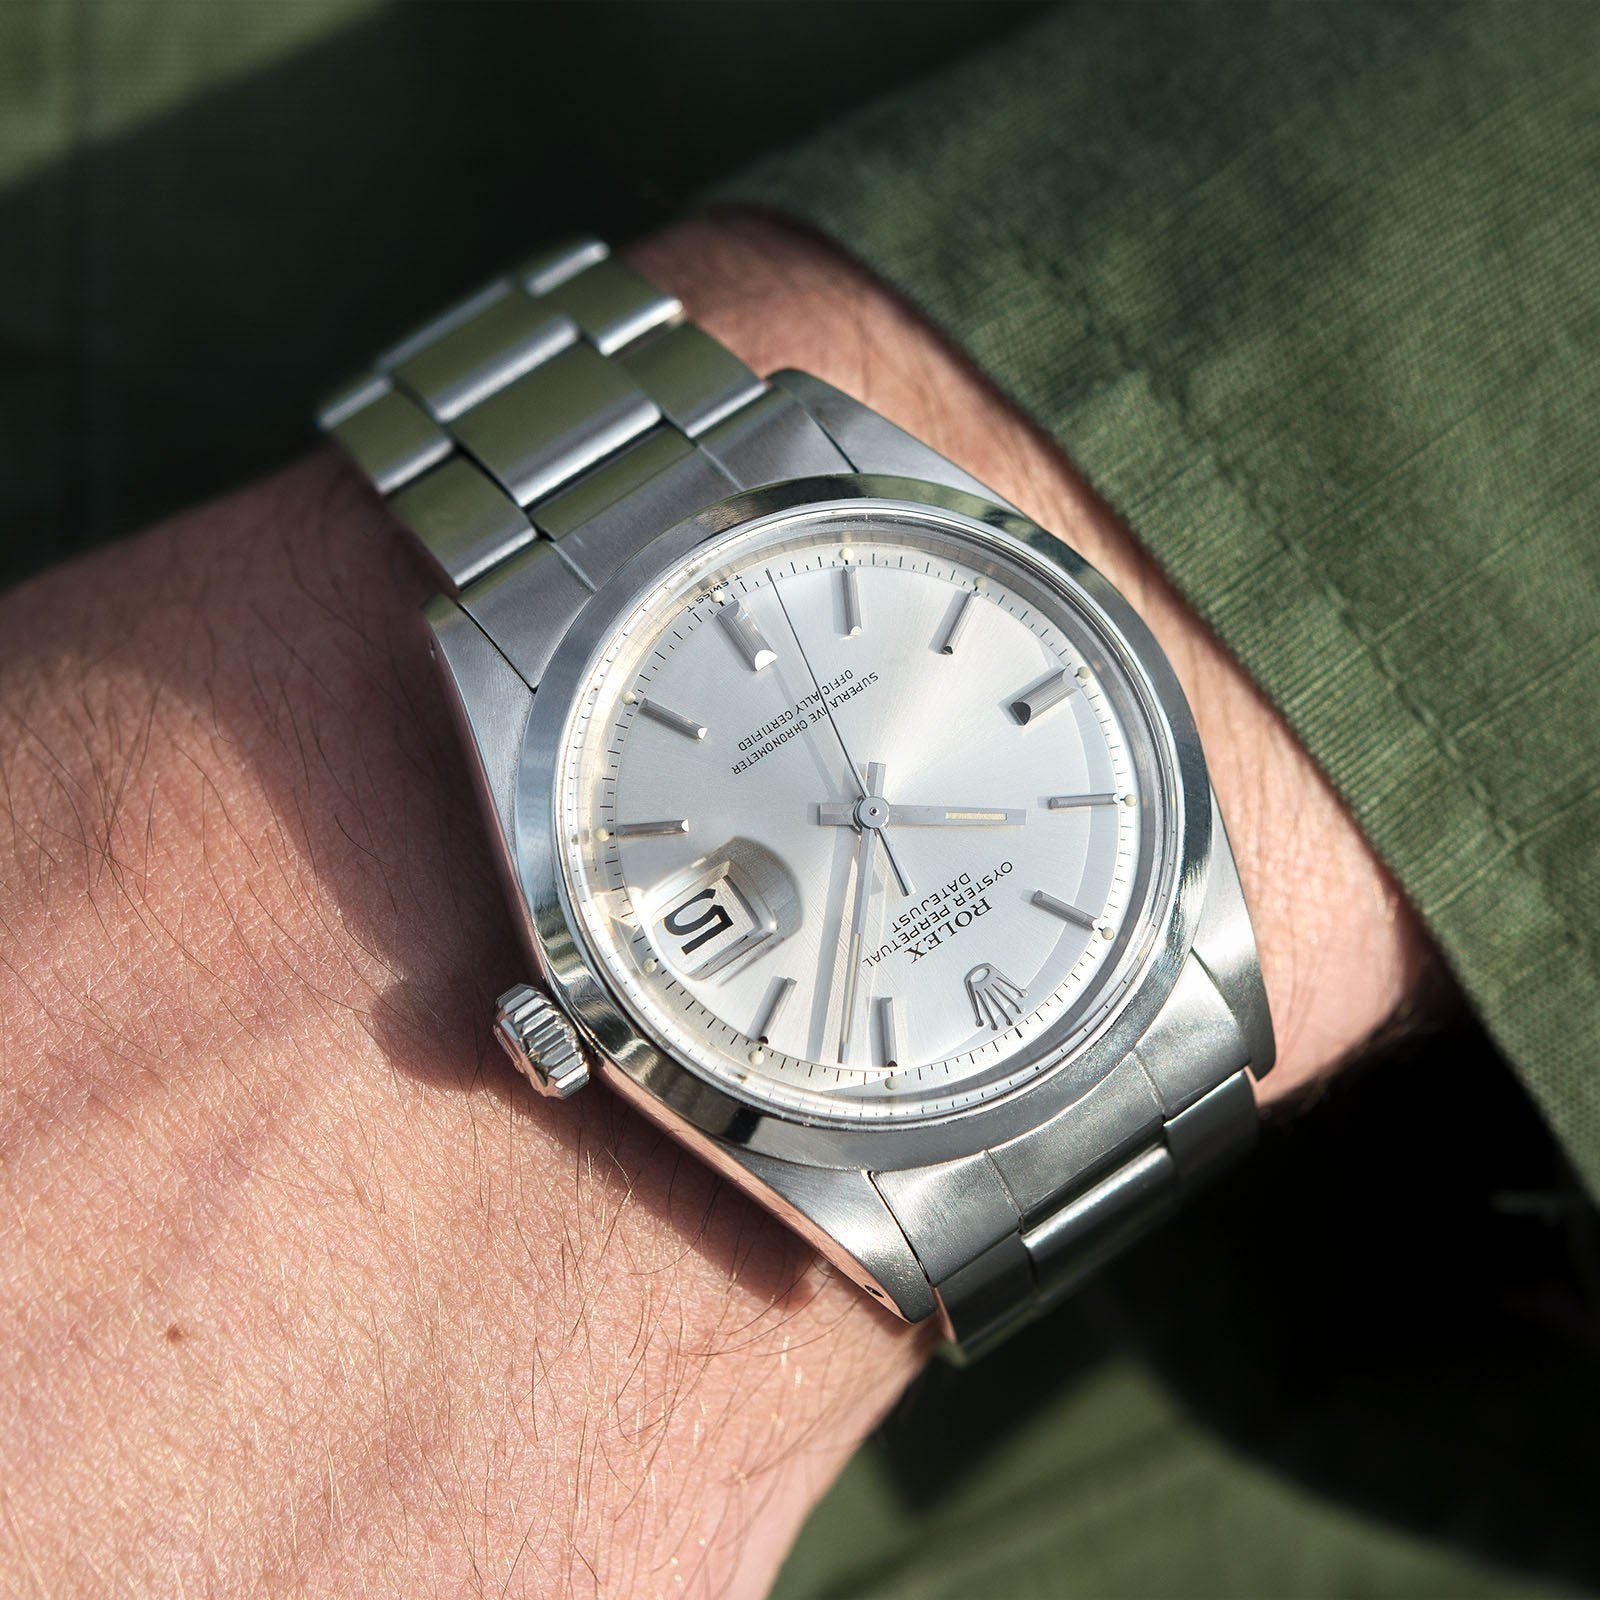 Rolex Datejust Silver Dial 1600